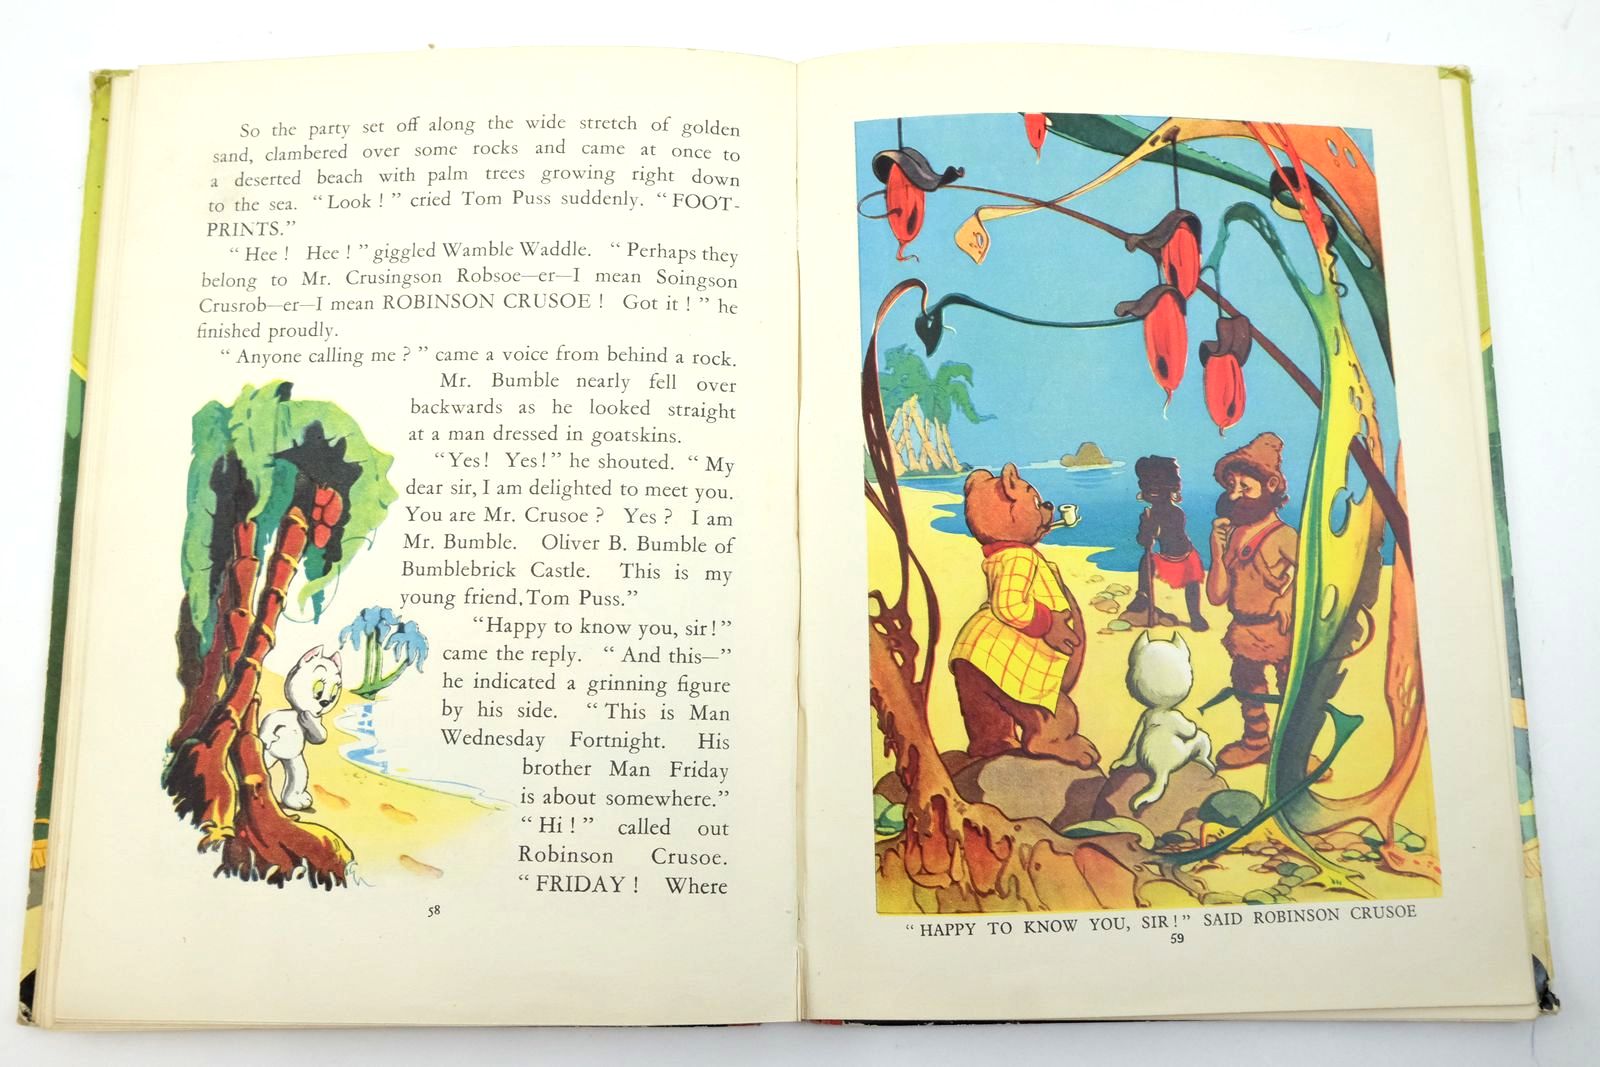 Photo of TOM PUSS AT THE PANTO written by Toonder, Marten illustrated by Toonder, Marten published by Birn Brothers Ltd. (STOCK CODE: 2138088)  for sale by Stella & Rose's Books